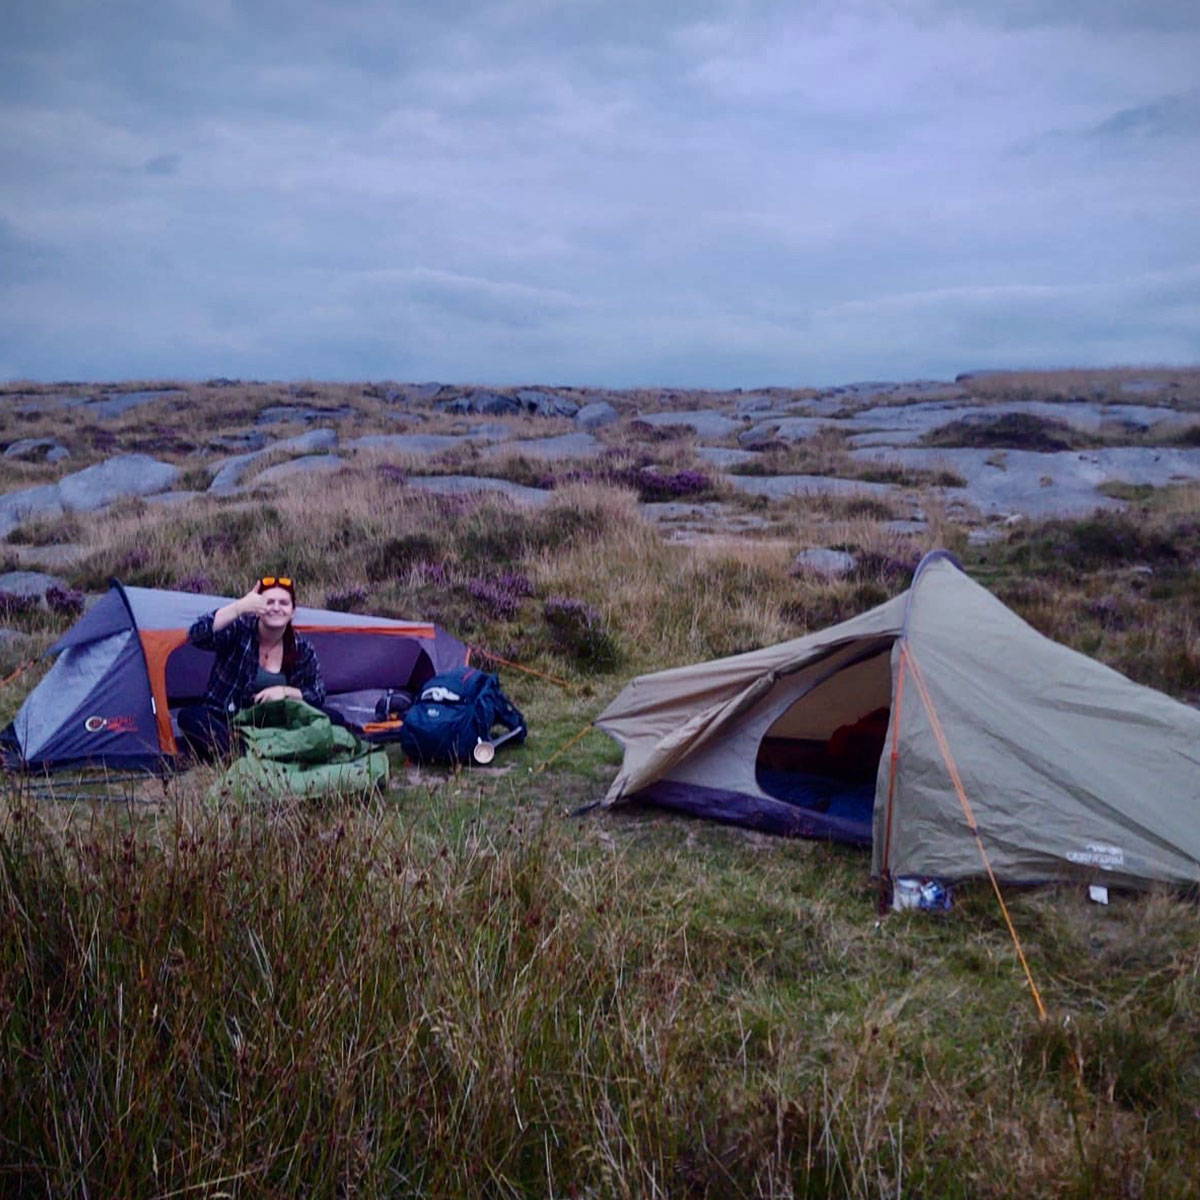 3RD ROCK's creative director grace showing off her wild camping setup - approved with a big thumbs up!